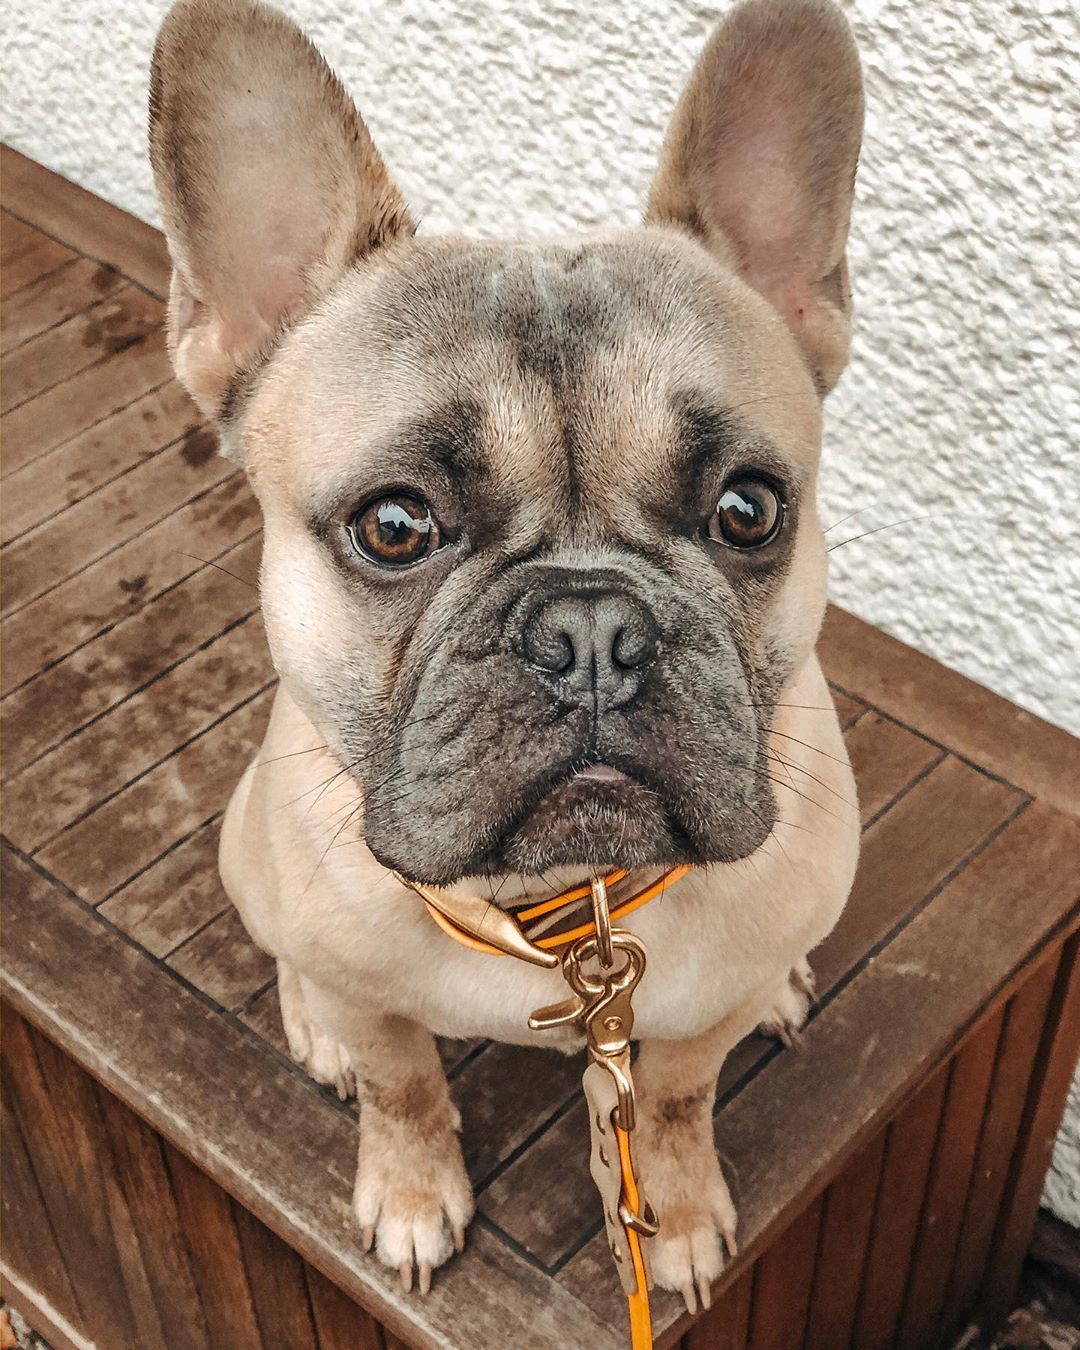 14 Facts About French Bulldogs That Will Make You Smile